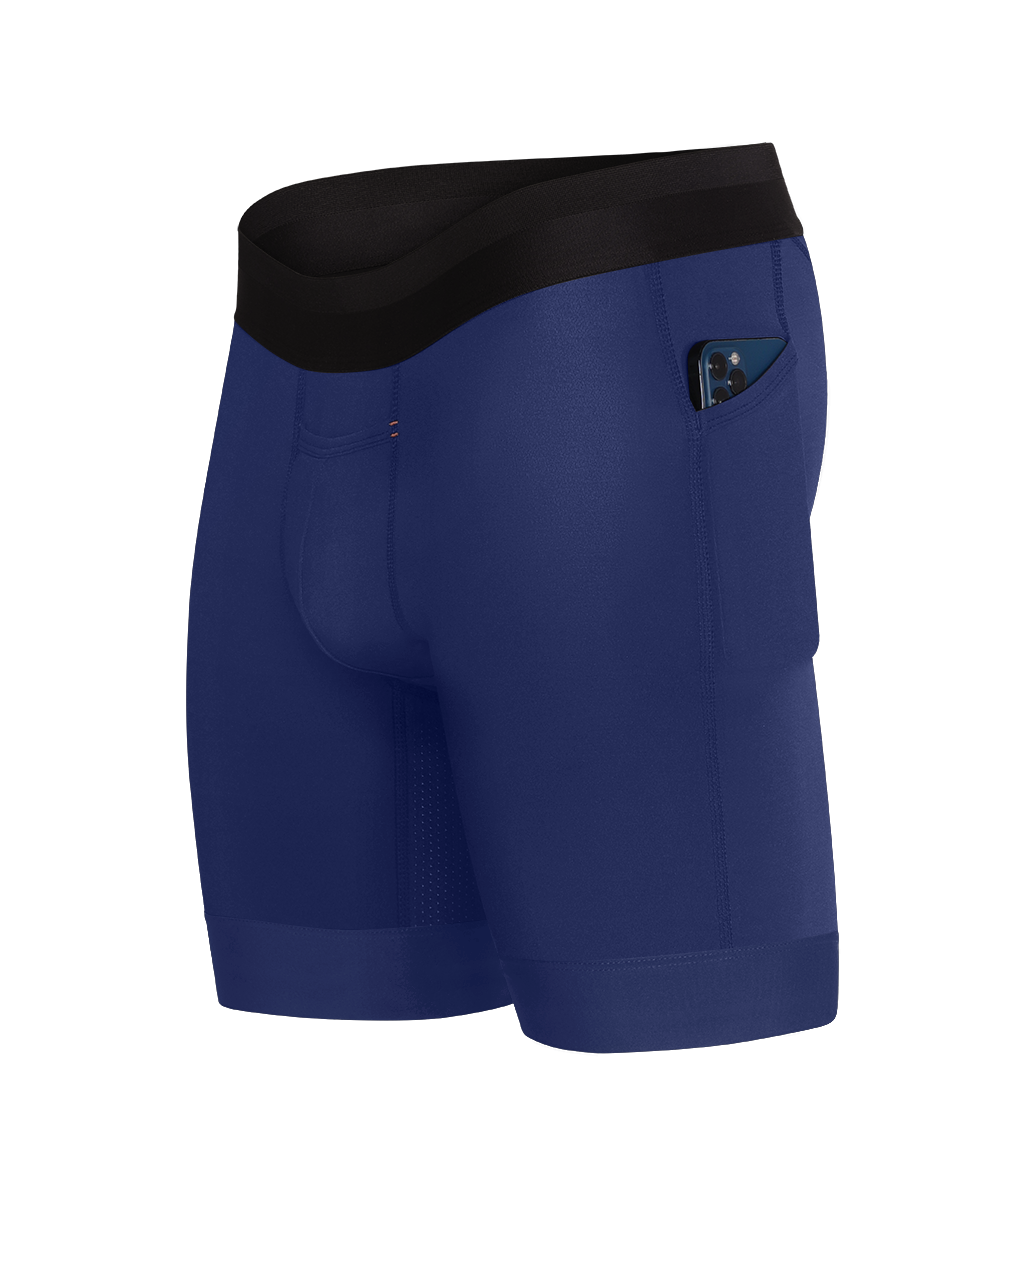  Saxx Men's Underwear - Sport 2 Life 2N1 Short 7 with Built-in  Pouch Support - Shorts for Men, Fall : Clothing, Shoes & Jewelry